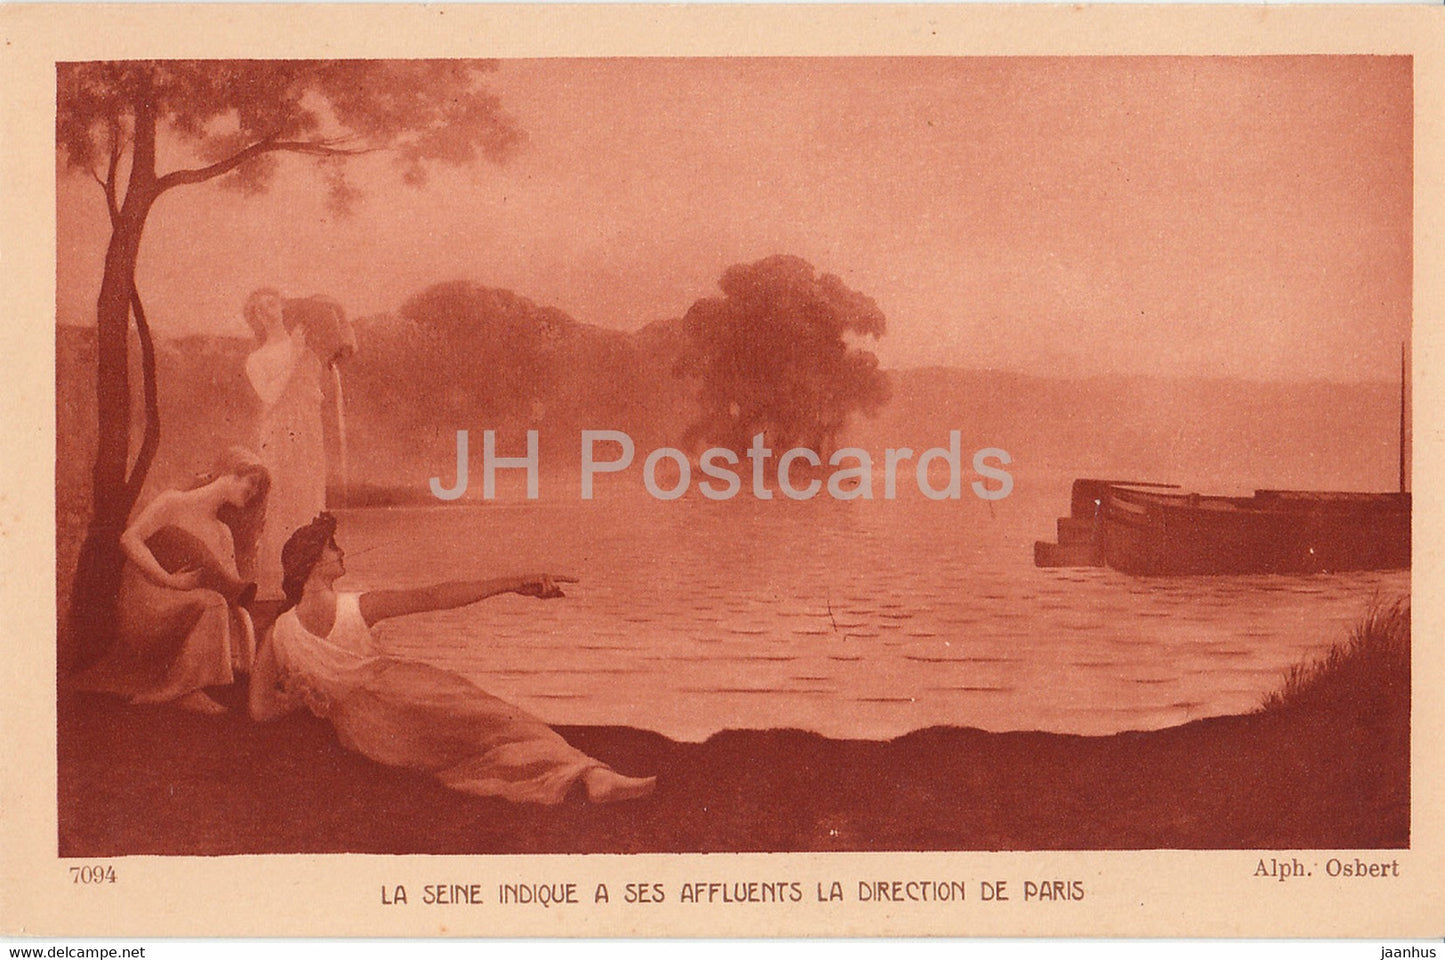 painting by Alphonse Osbert - La Seine Indique a ses Affluents - 7094 - French art - old postcard - 1930 - France - used - JH Postcards